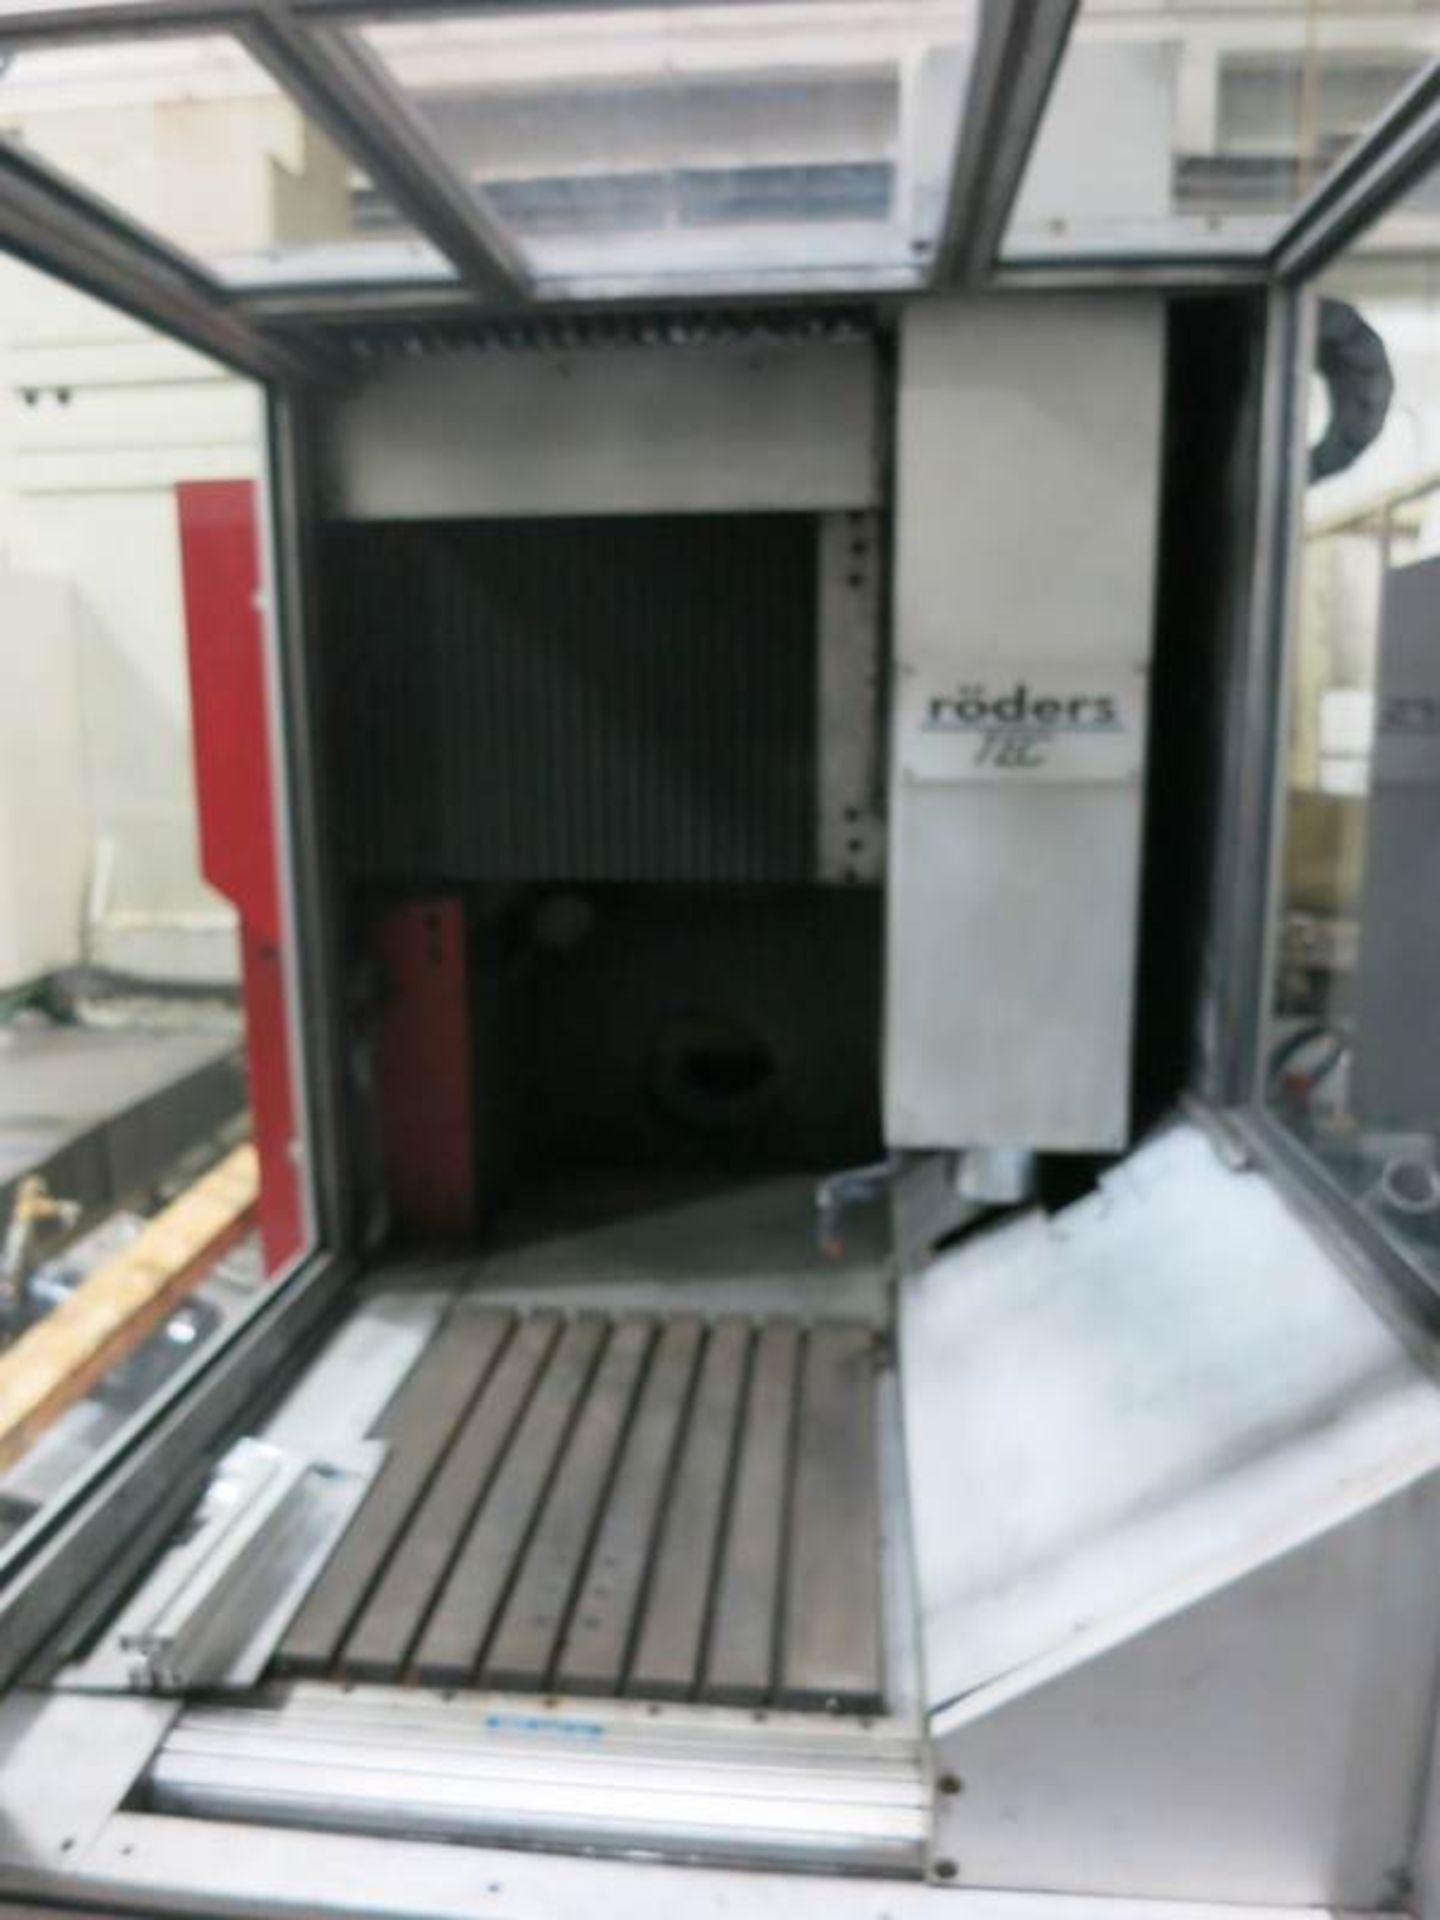 Roders TEC RFM 600 CNC 3-Axis High speed Vertical Machining Center, S/N 87995-43, New 1998 General - Image 4 of 9